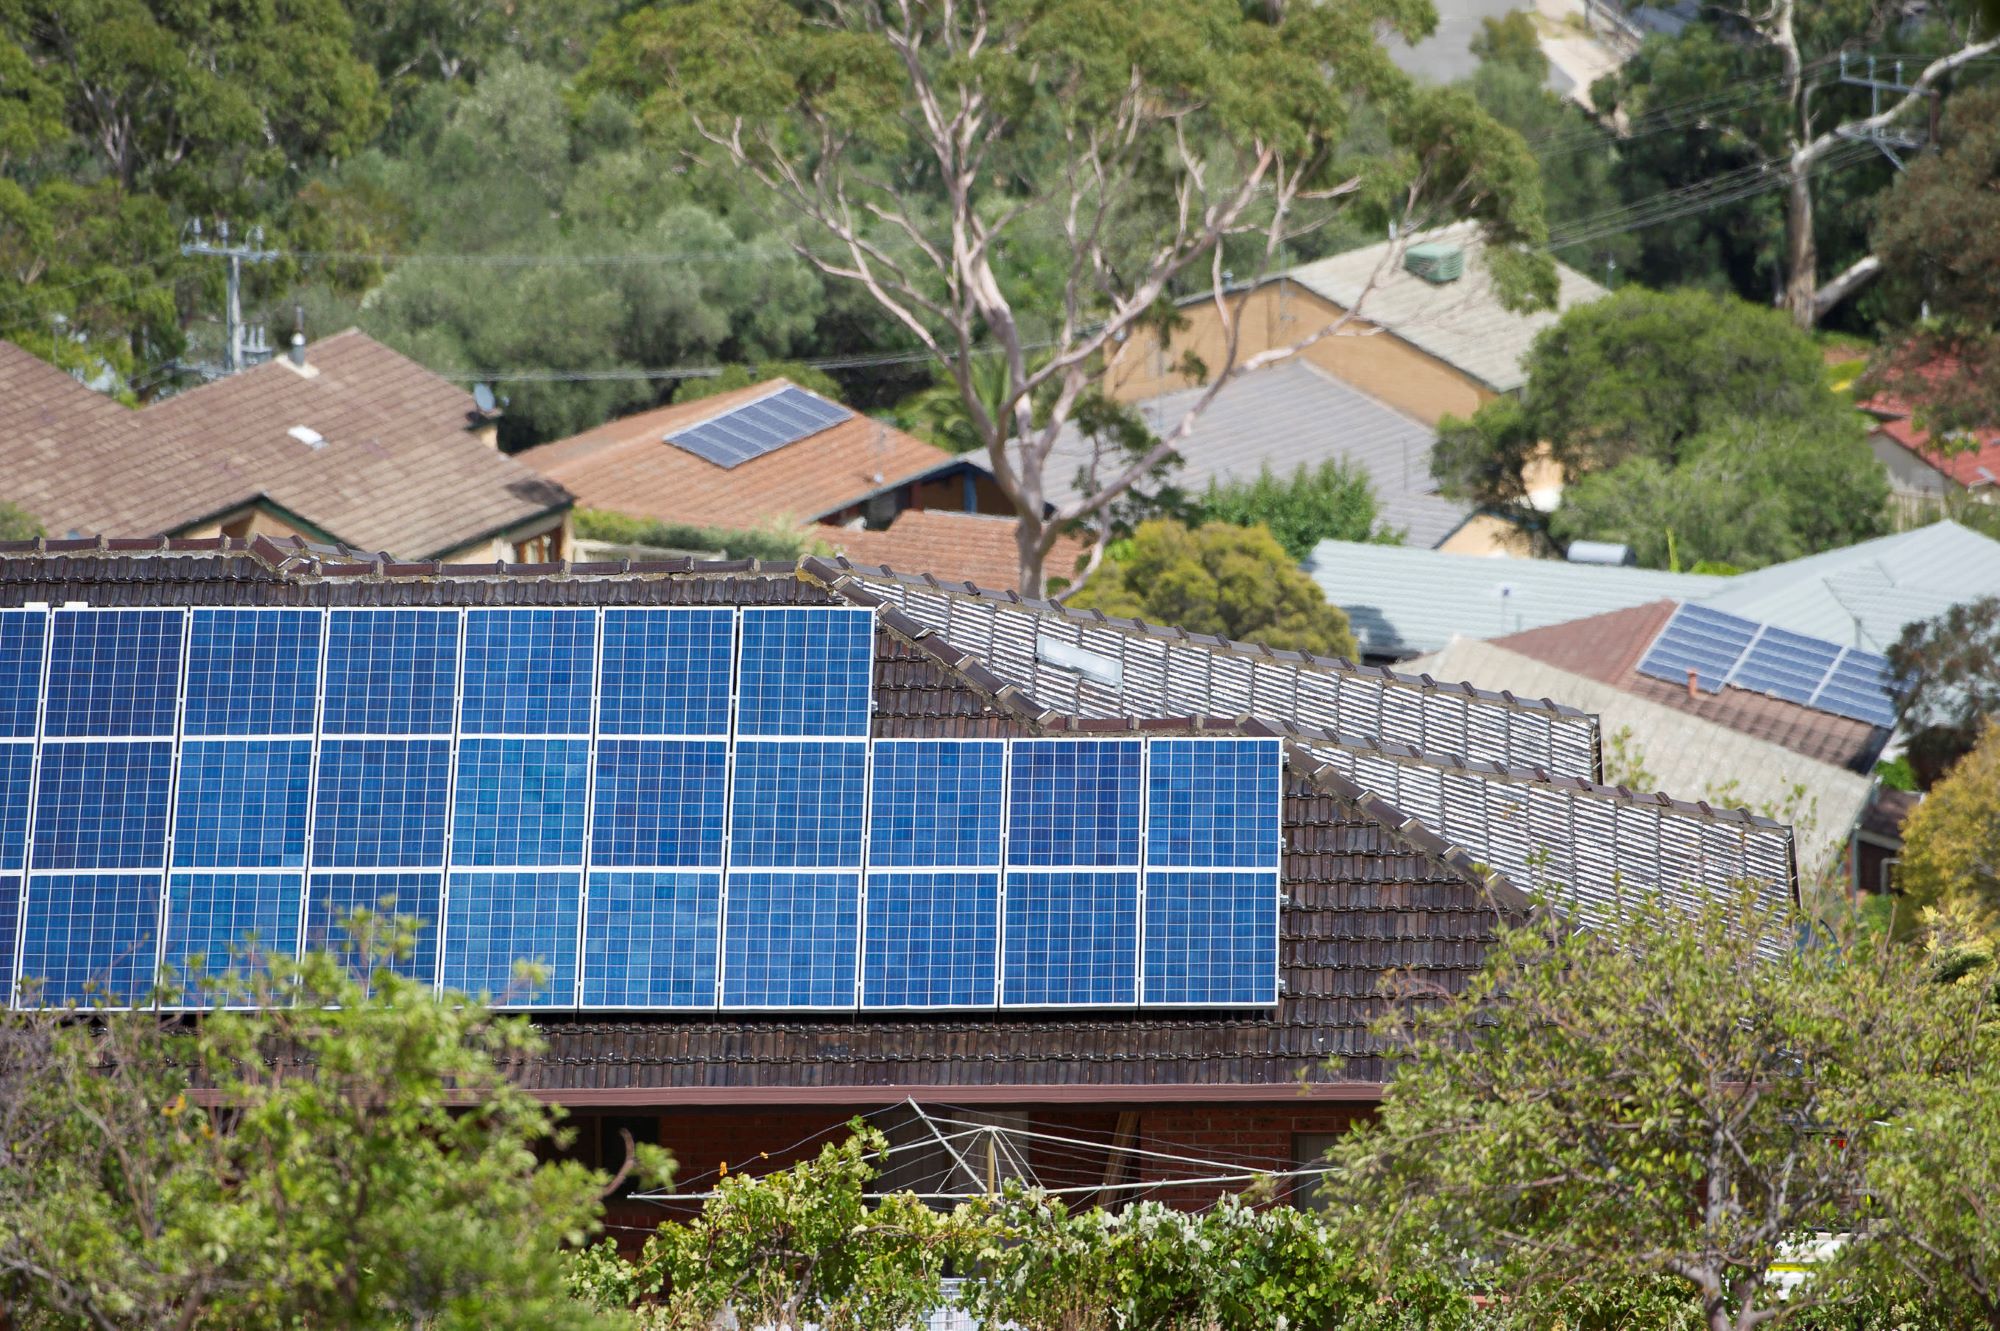 Solar panels located on the roof of a house